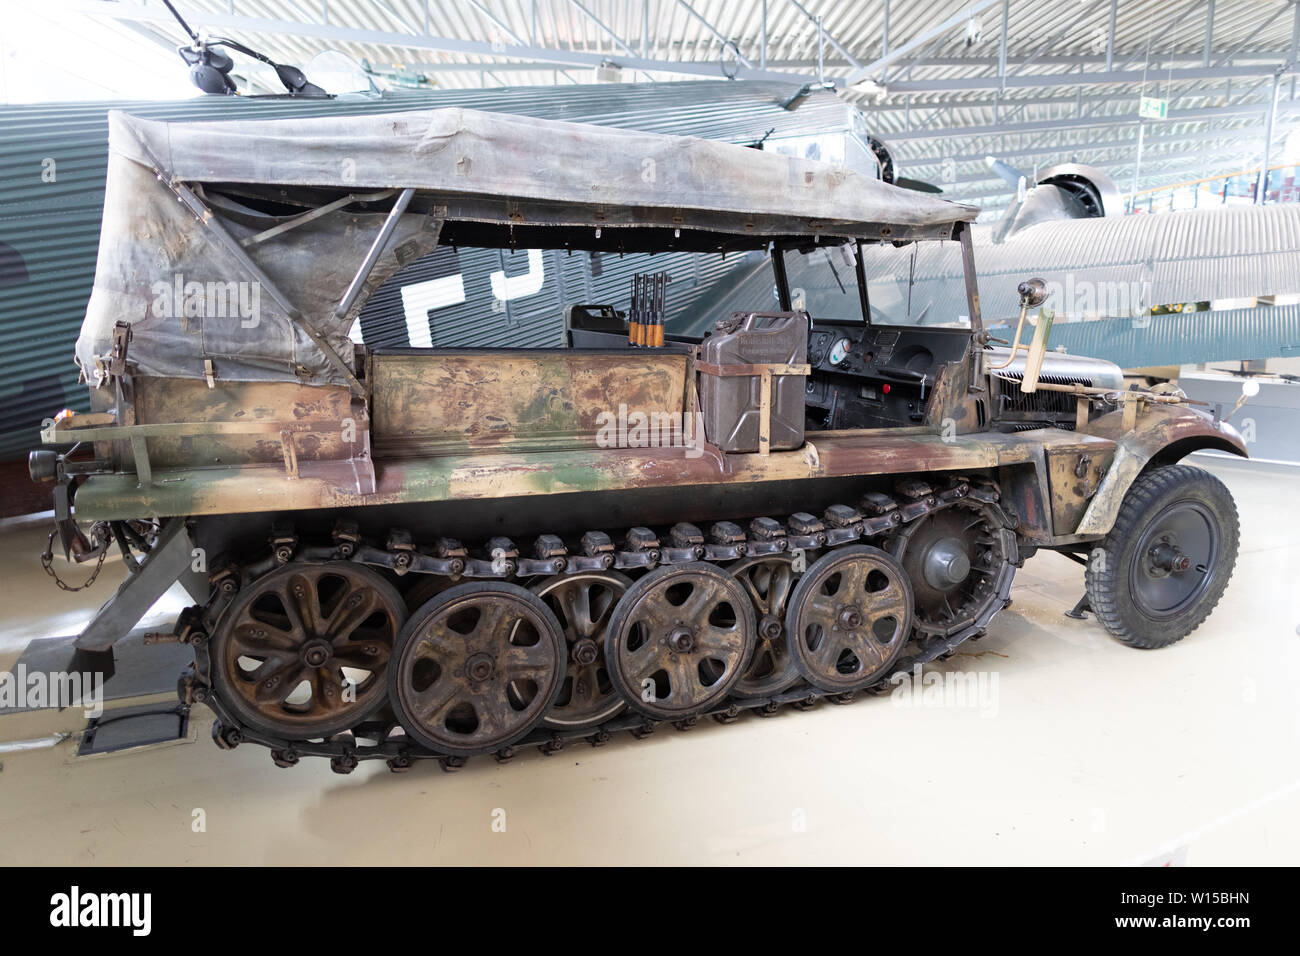 A half-track military vehicle used by the German Wehrmacht Heer, Luftwaffe and Waffen-SS during the Second World War on museum display at Gardemoen. Stock Photo